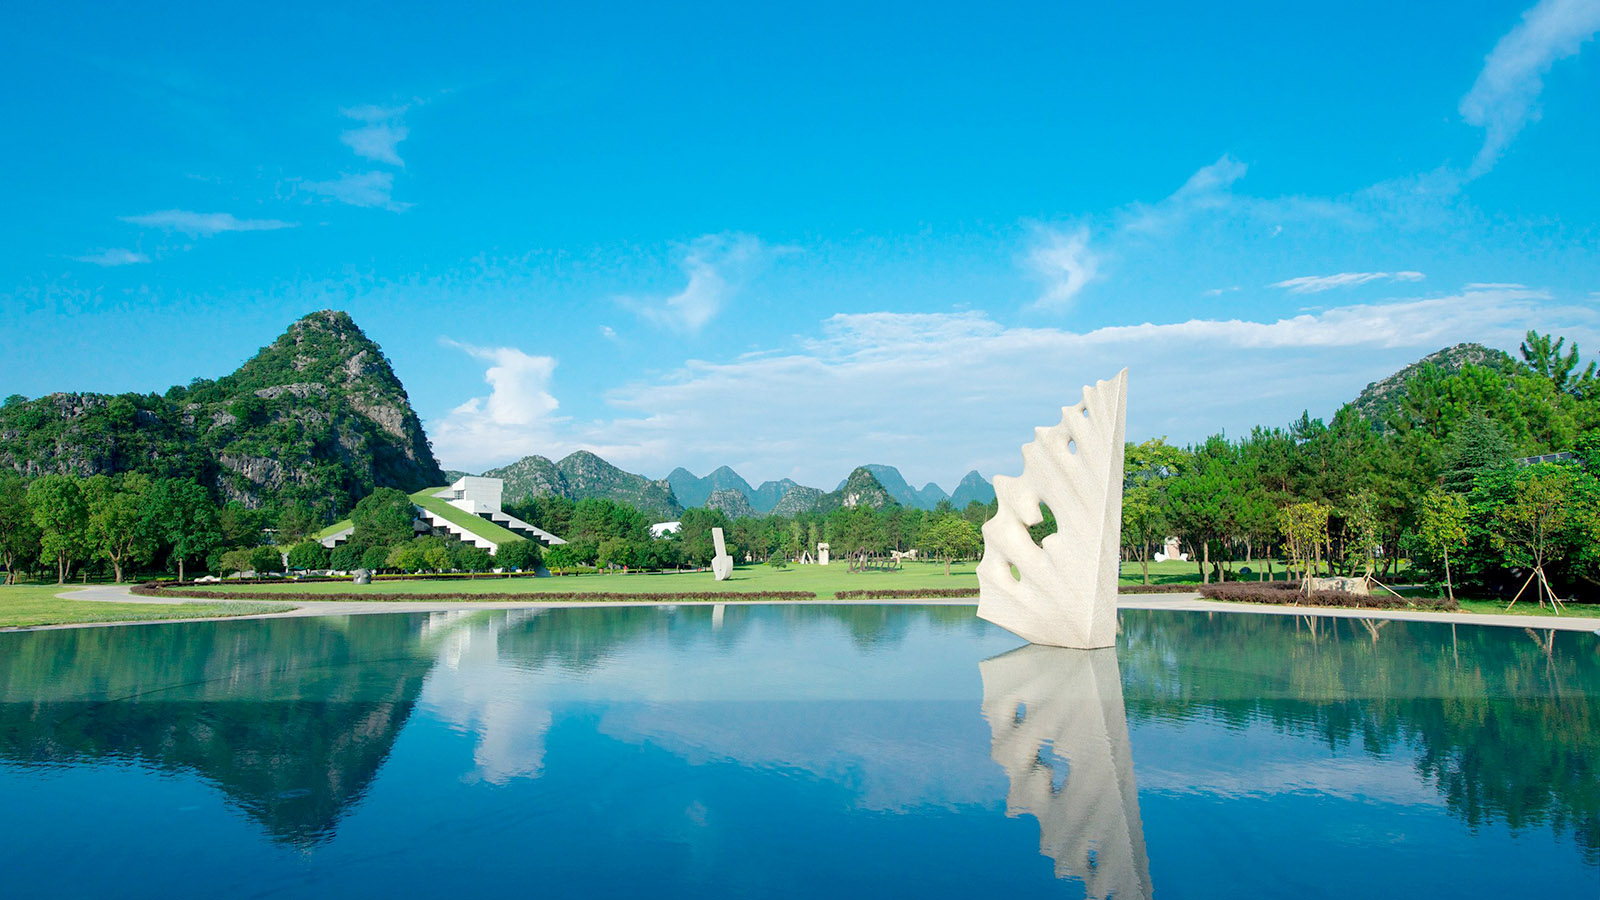 Installation view of <i>Flying on the Water</i>, Yuzi Paradise Sculpture Park, Guilin, China, 2018